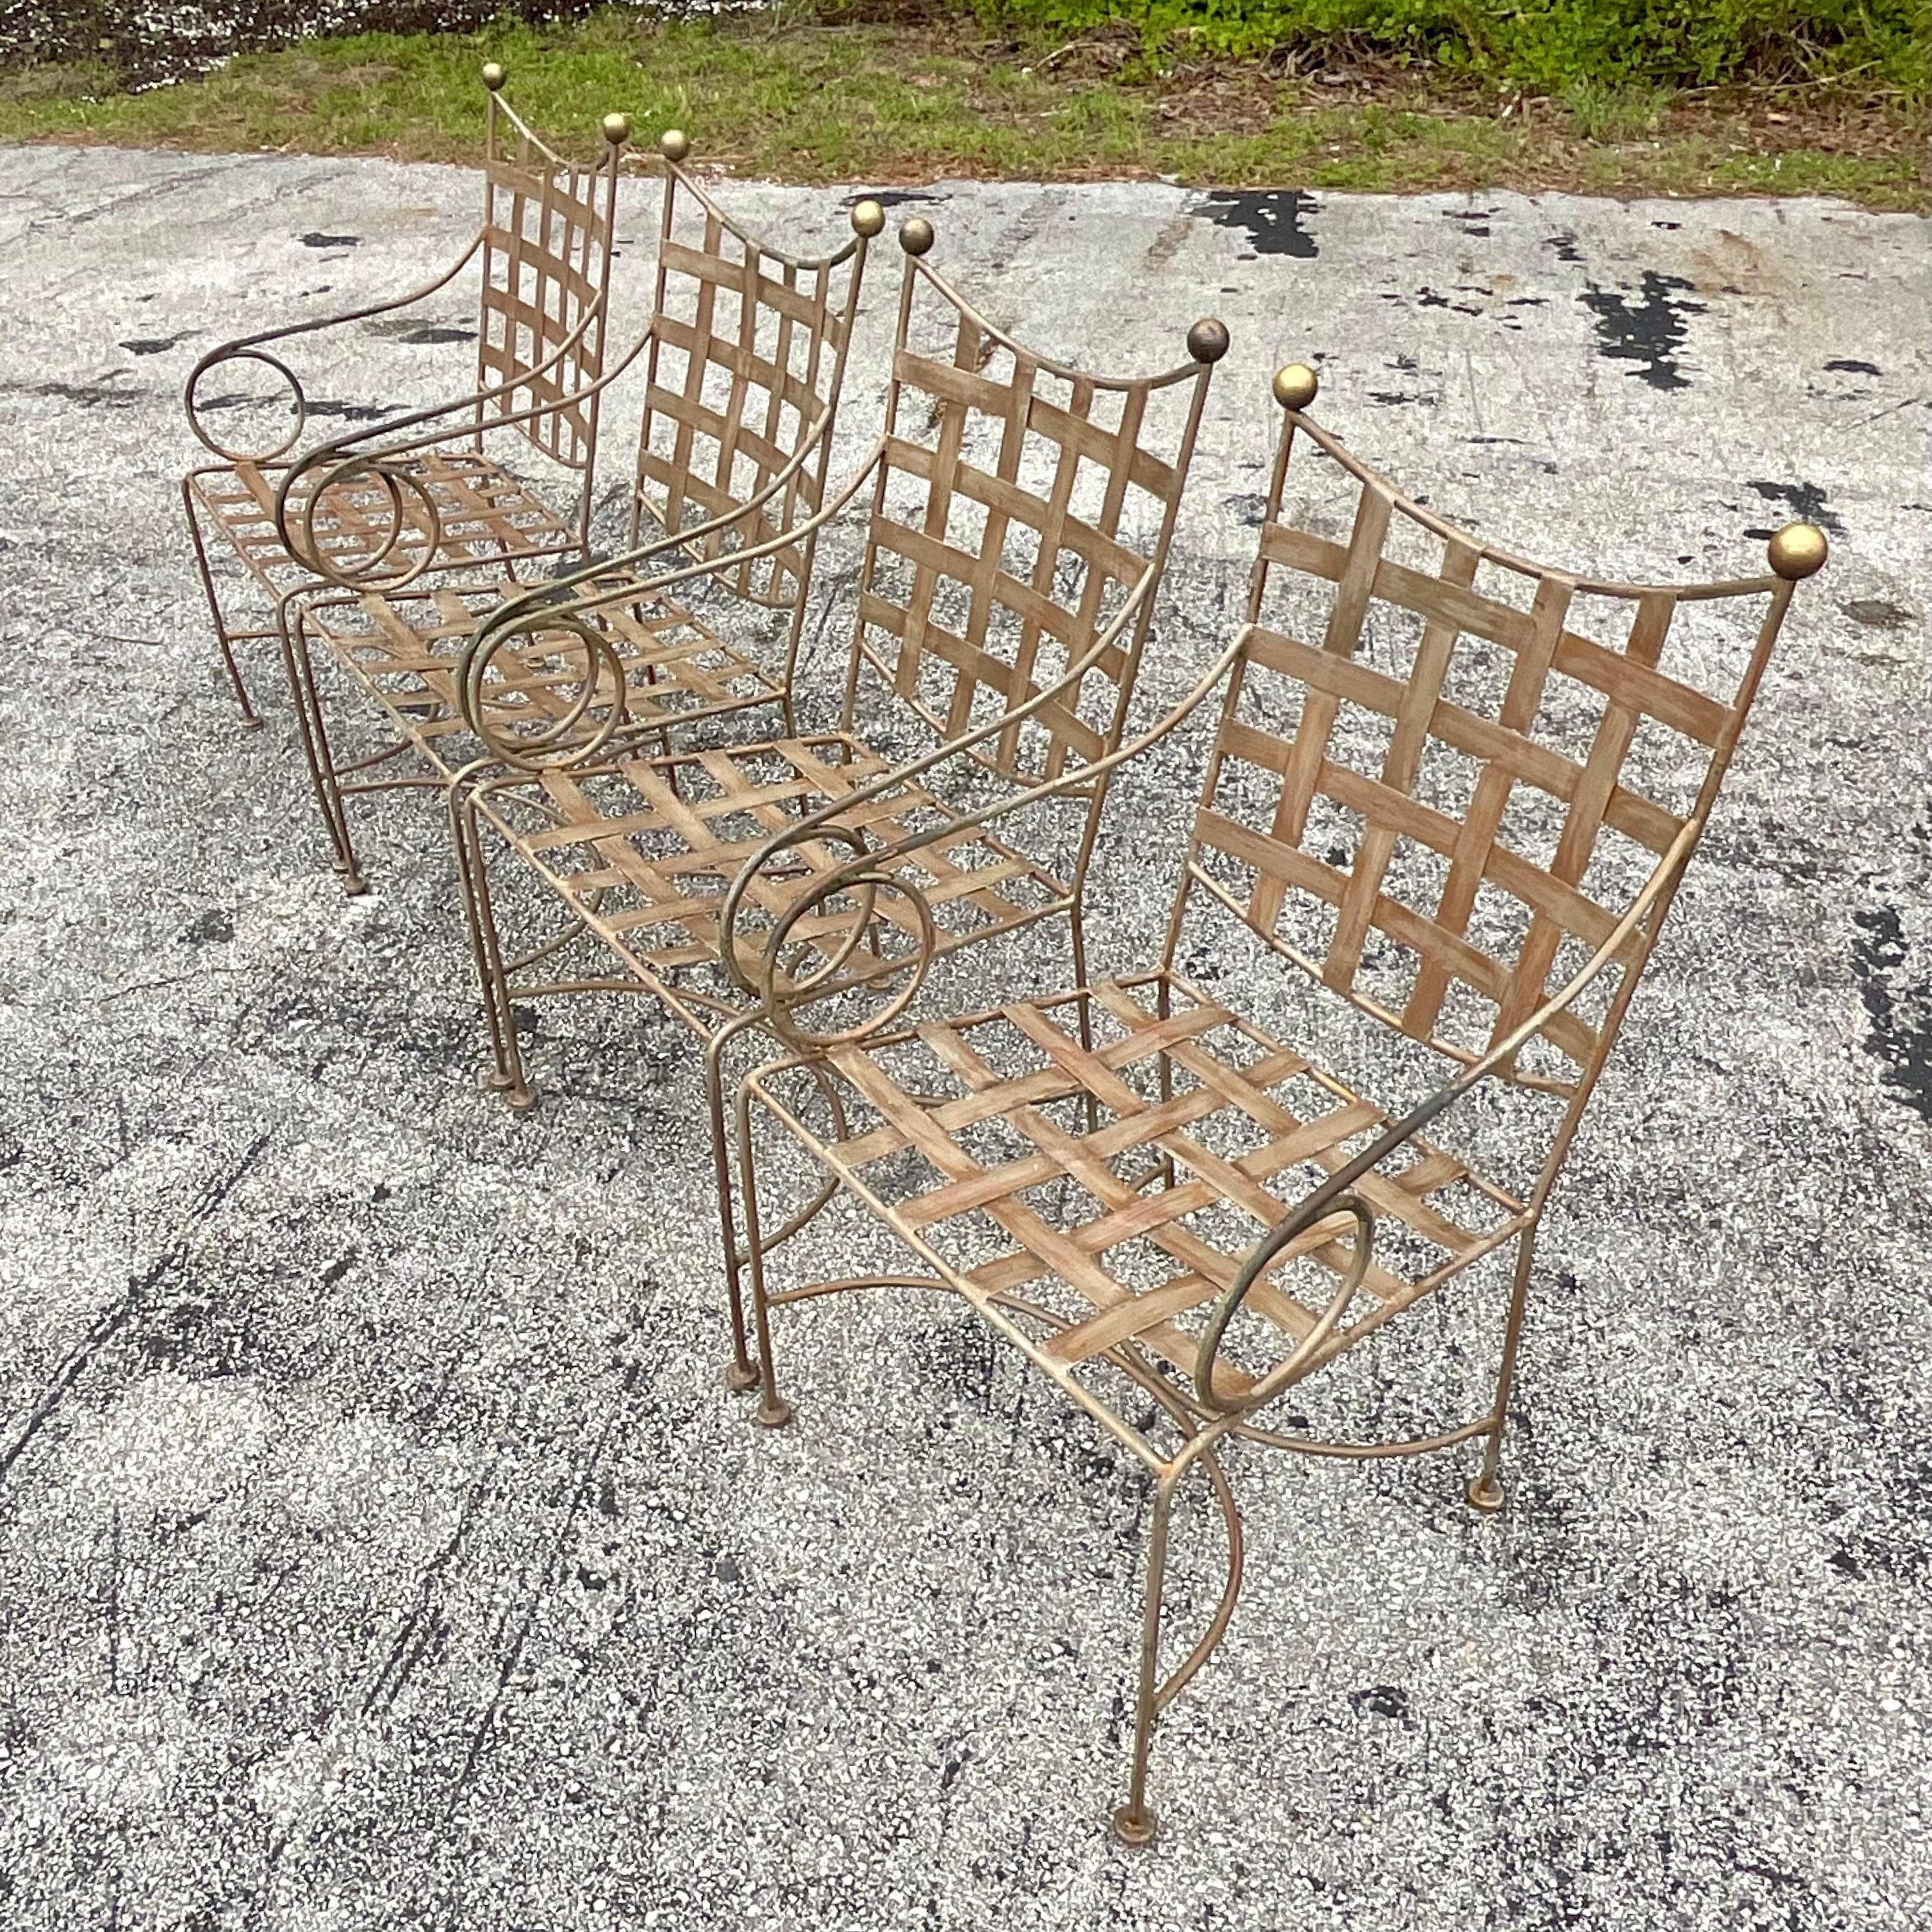 A fabulous vintage set of Coastal outdoor dining set. Made by the iconic Kessler group. Unmarked. Four aluminum chairs with a coordinating table. Coordinating bar stools also available on my  page. Acquired from a Palm Beach estate.

Table